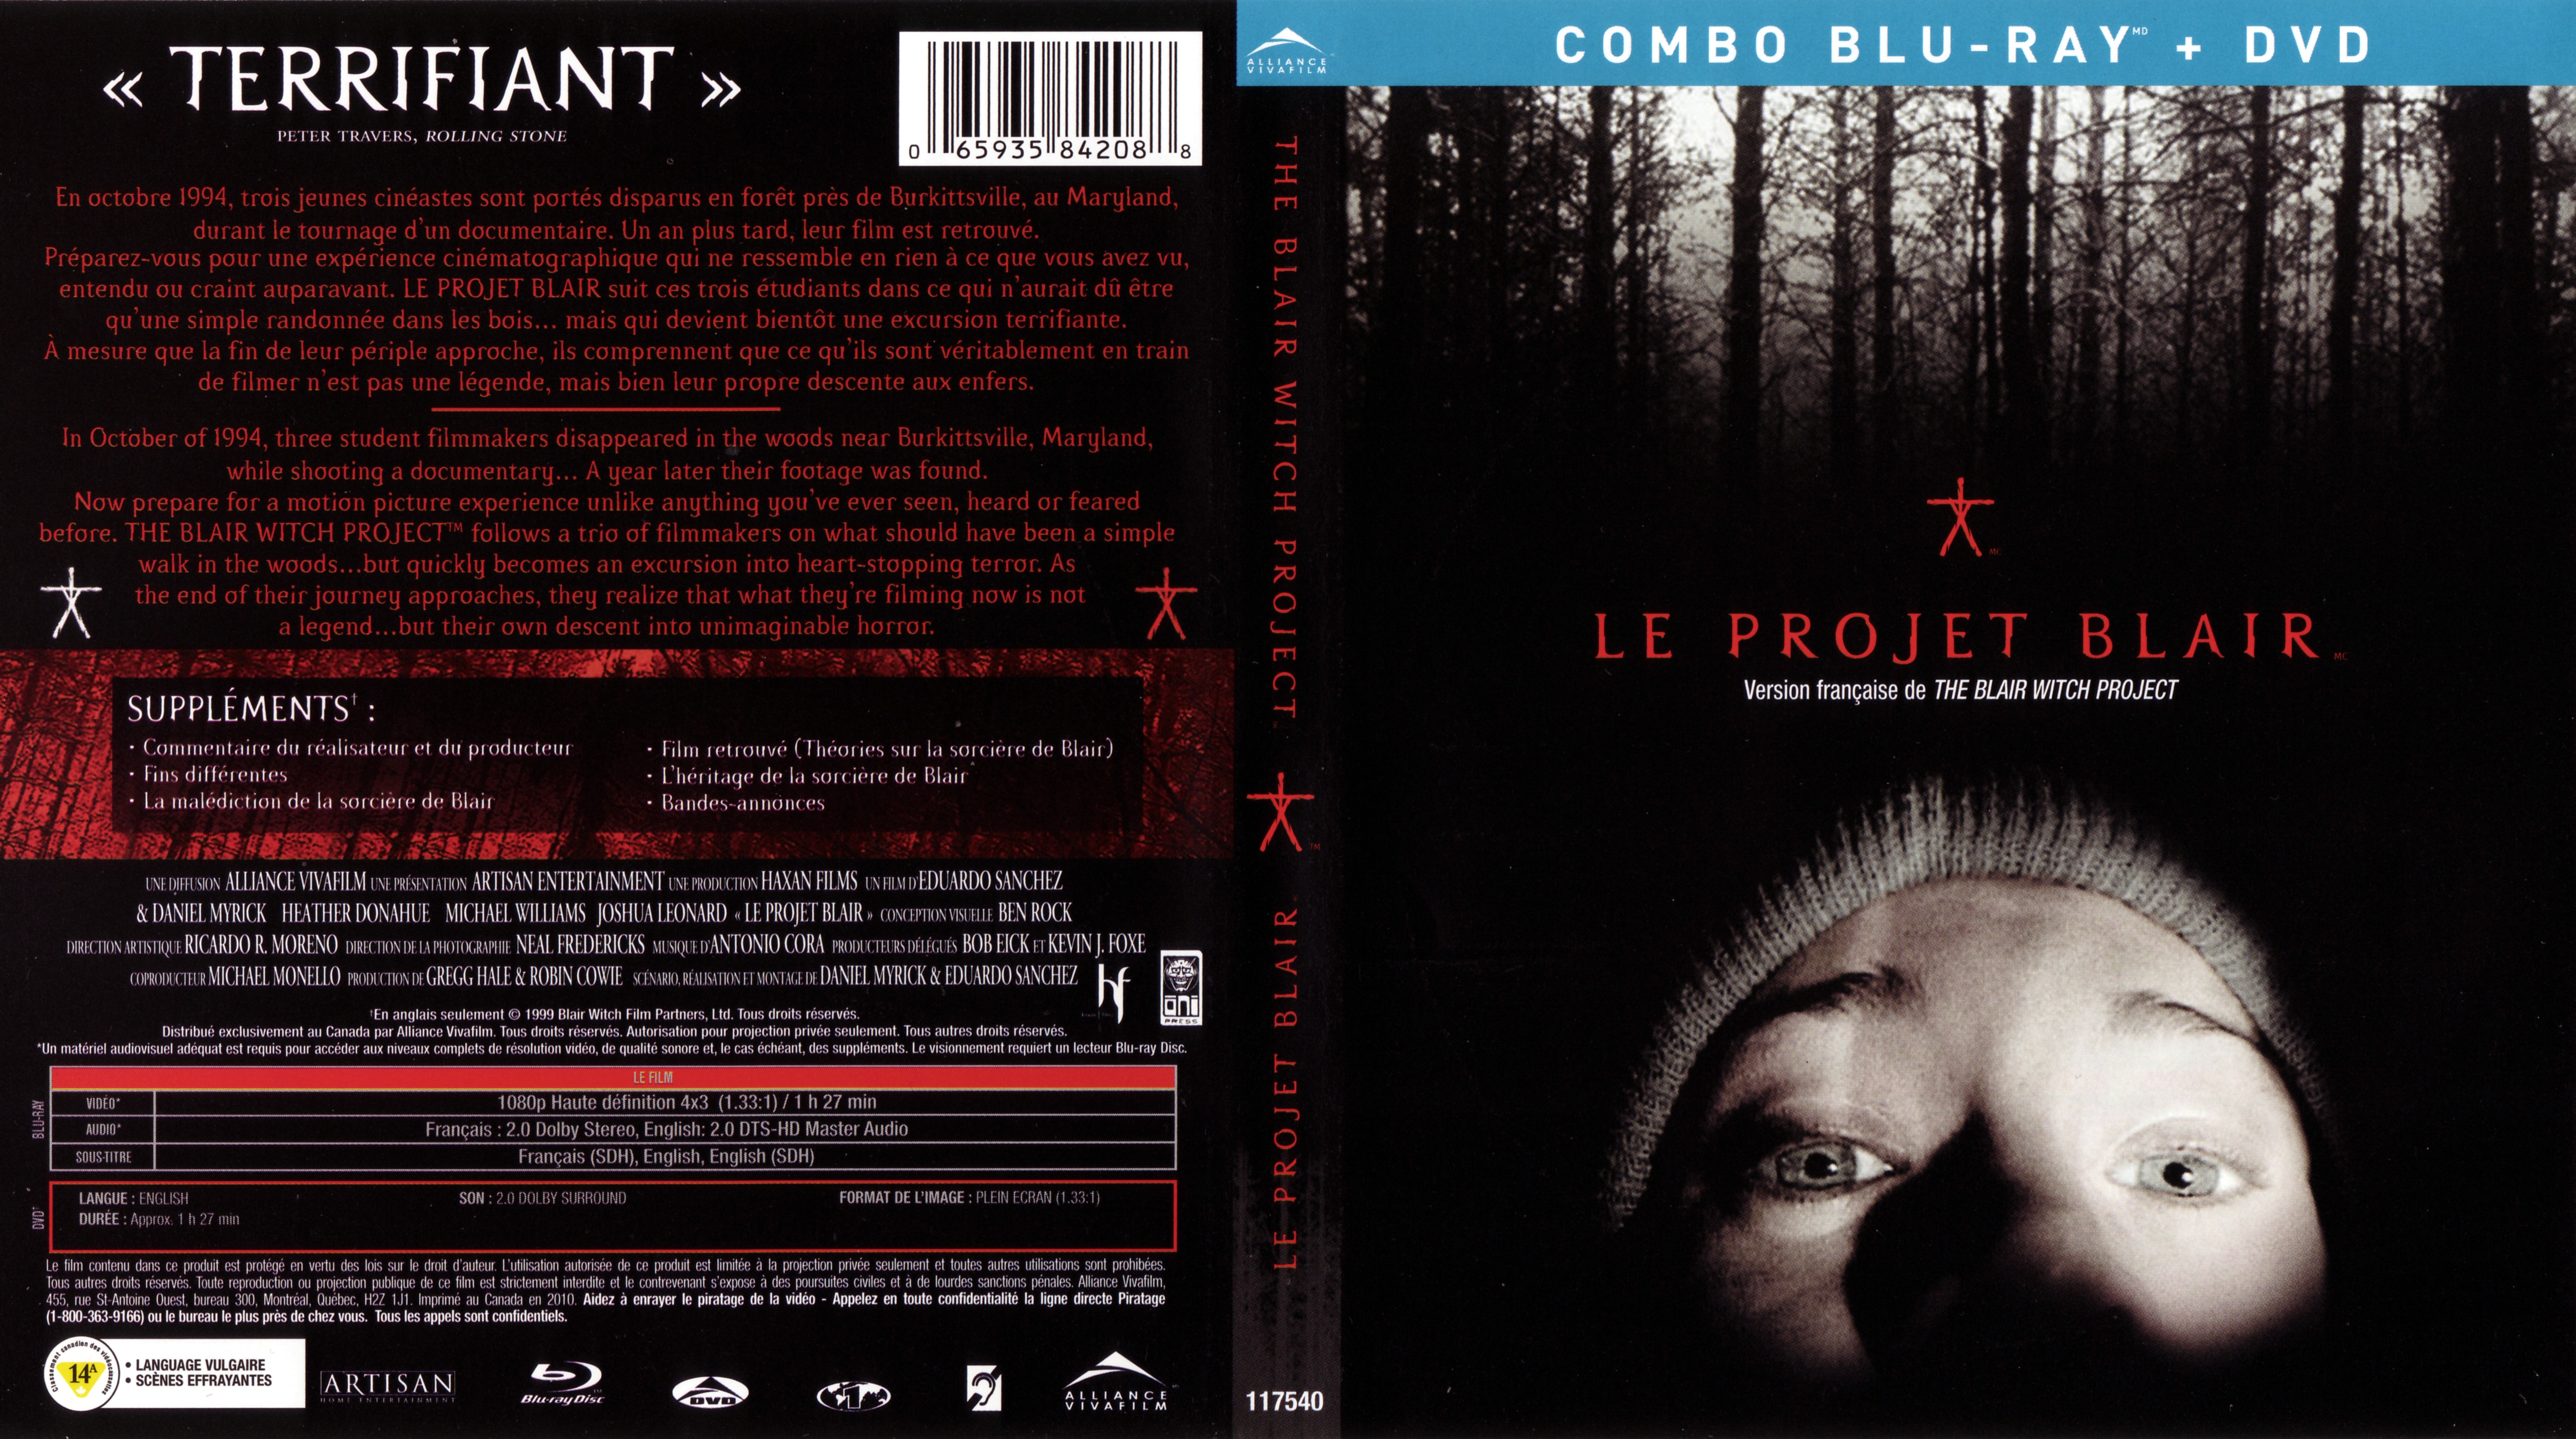 Jaquette DVD Le projet blair witch - The Blair Witch Project (Canadienne) (BLU-RAY)